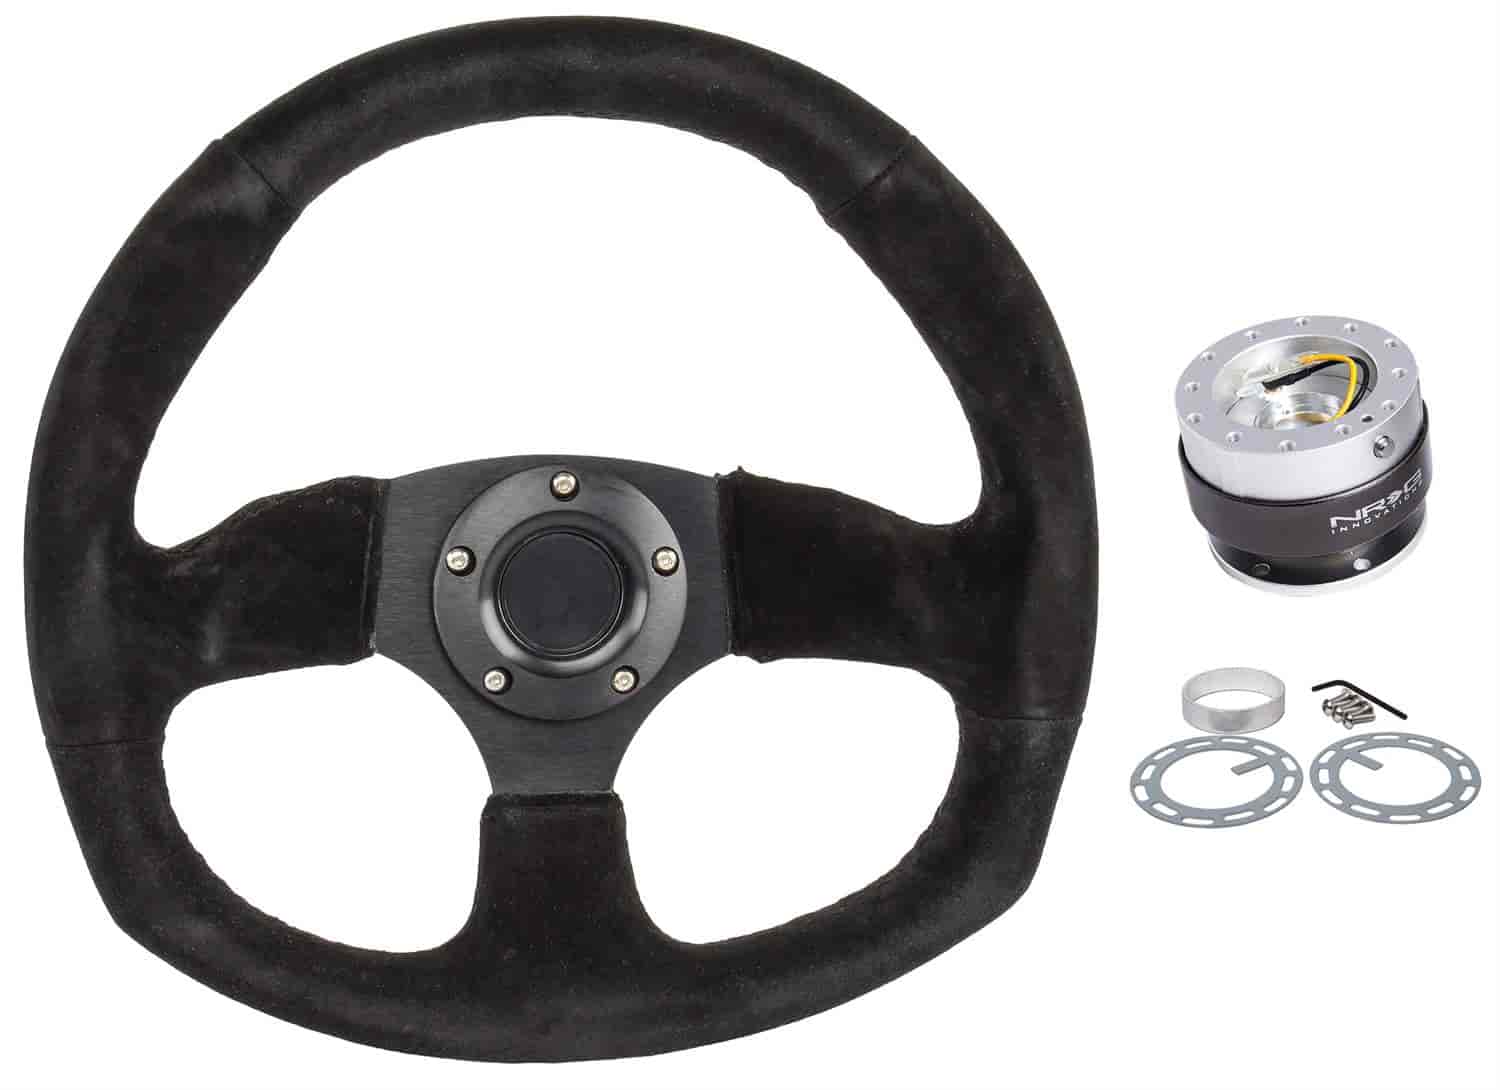 JEGS 70438K3: Racing Steering Wheel Kit Includes: Aluminum Racing  Steering Wheel, 13 1/2 in. Dia., Black 3-Spoke, in. Dish with Black Suede  Full Wrap Grip  Yellow Center Marker, Steering